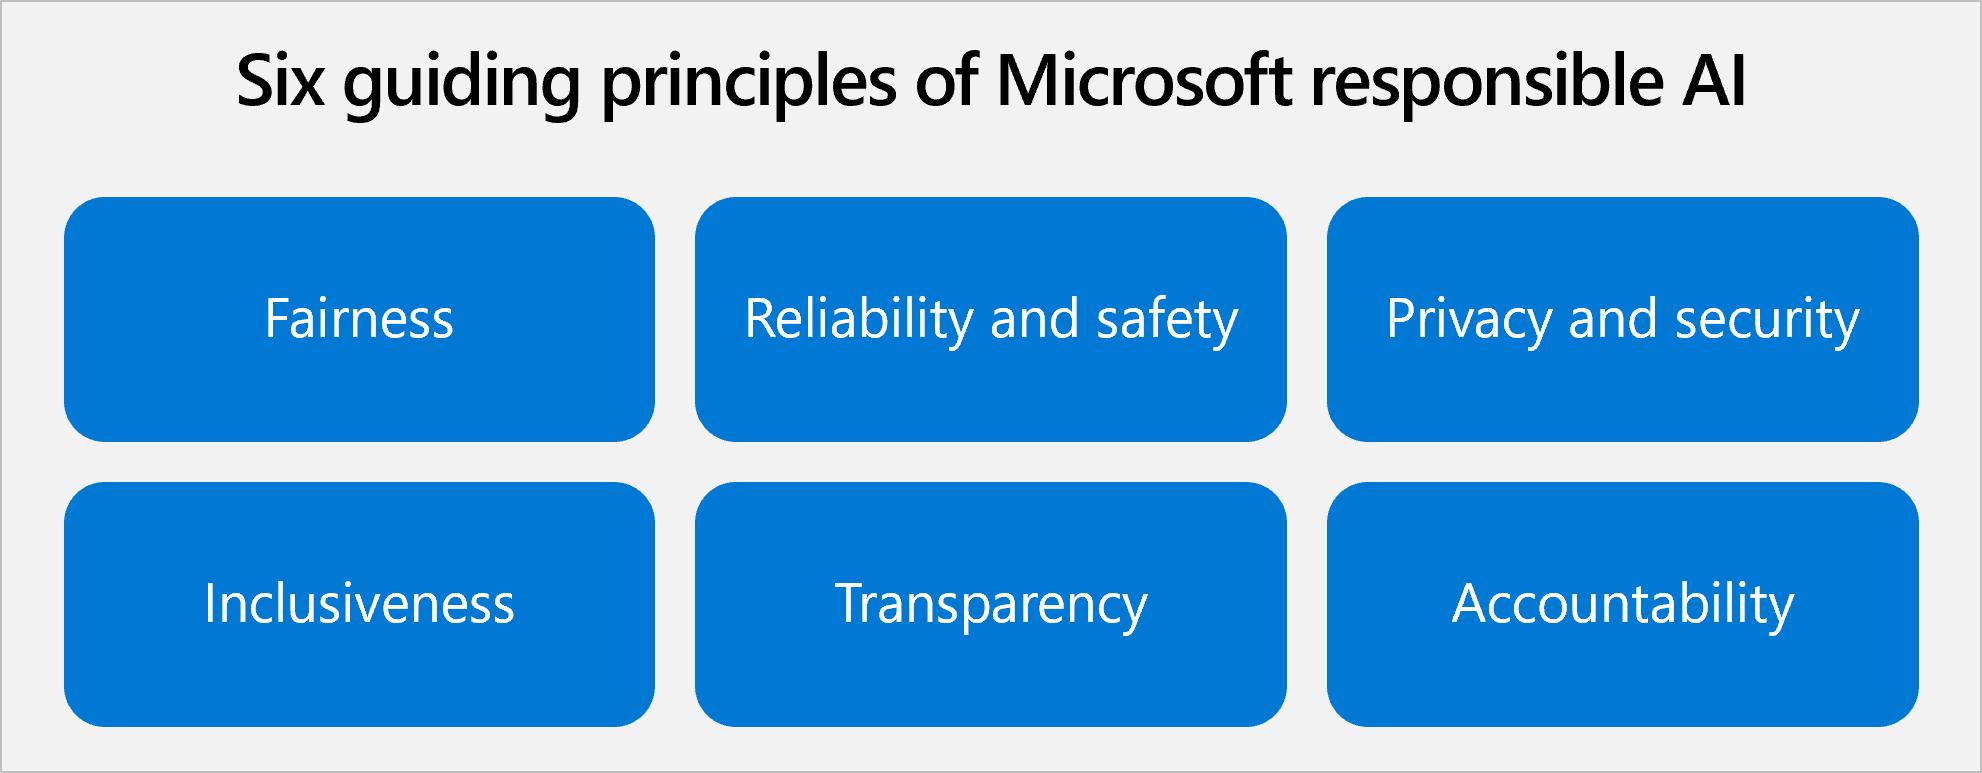 Diagram that shows six principles: fairness, reliability and safety, privacy and security, inclusiveness, transparency, and accountability.